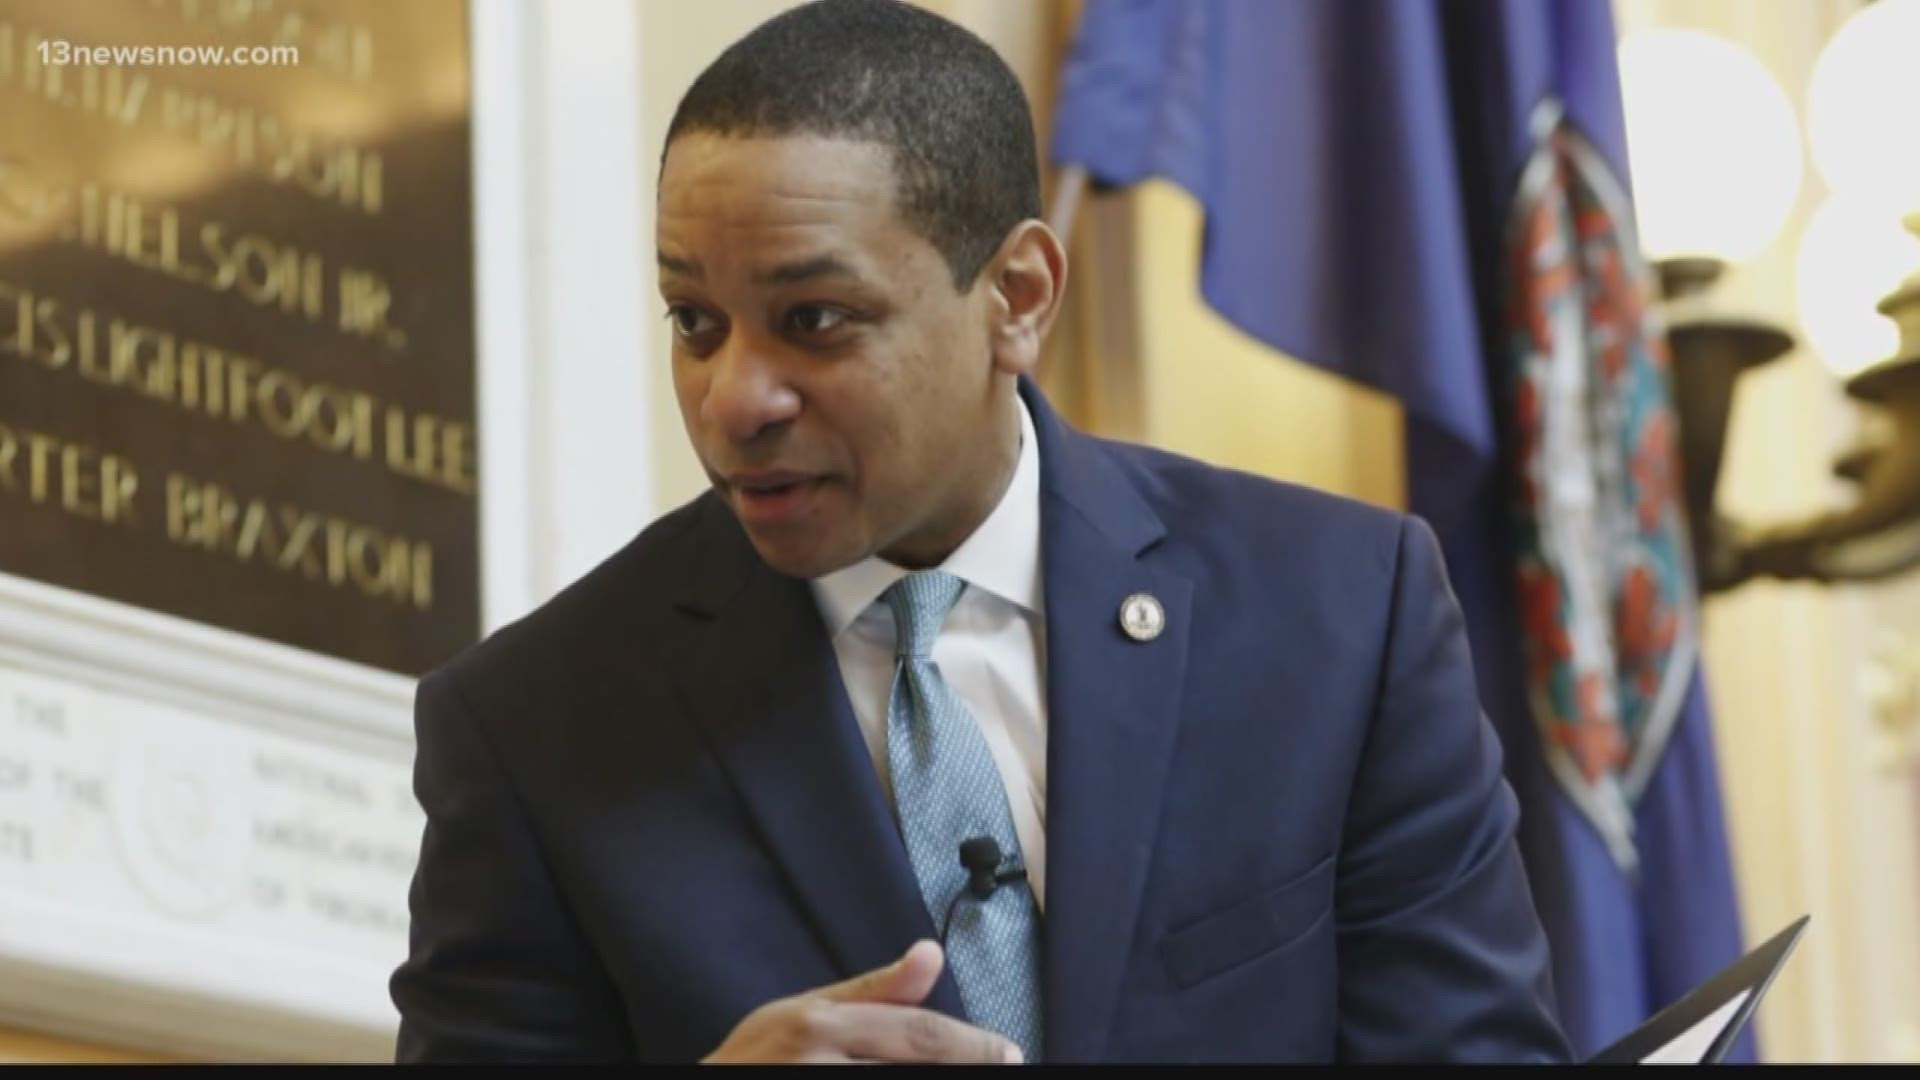 At least one lawmaker said he will try to pursue impeachment of Democratic Lt. Gov. Justin Fairfax after two women accused Fairfax of sexual assault in the 2000s, a move that experts believe would be a first in Virginia.